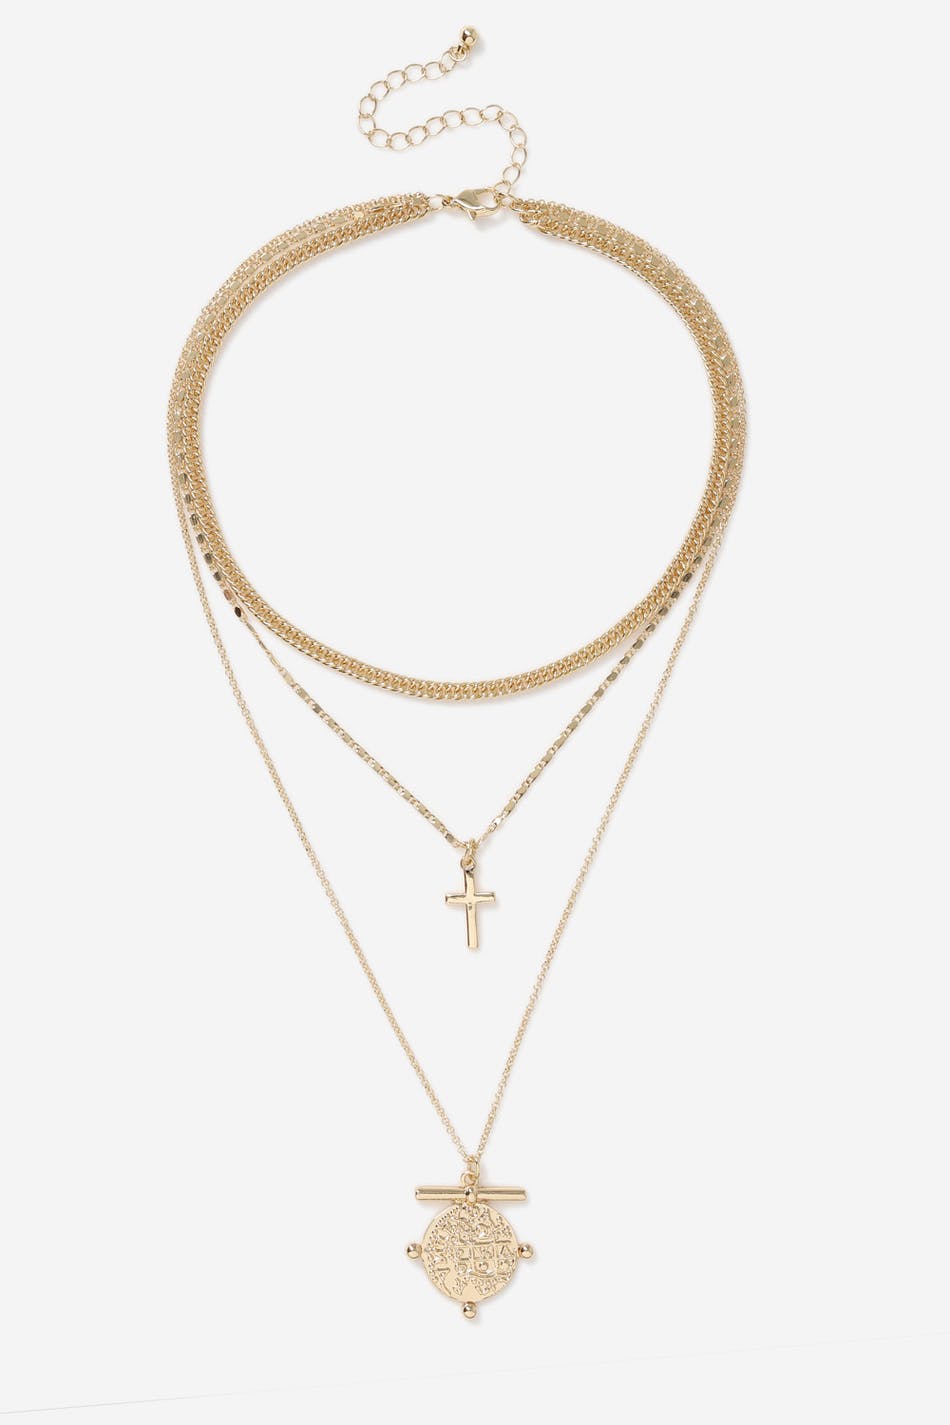 GOLD CROSS MIX CHAIN NECKLACE